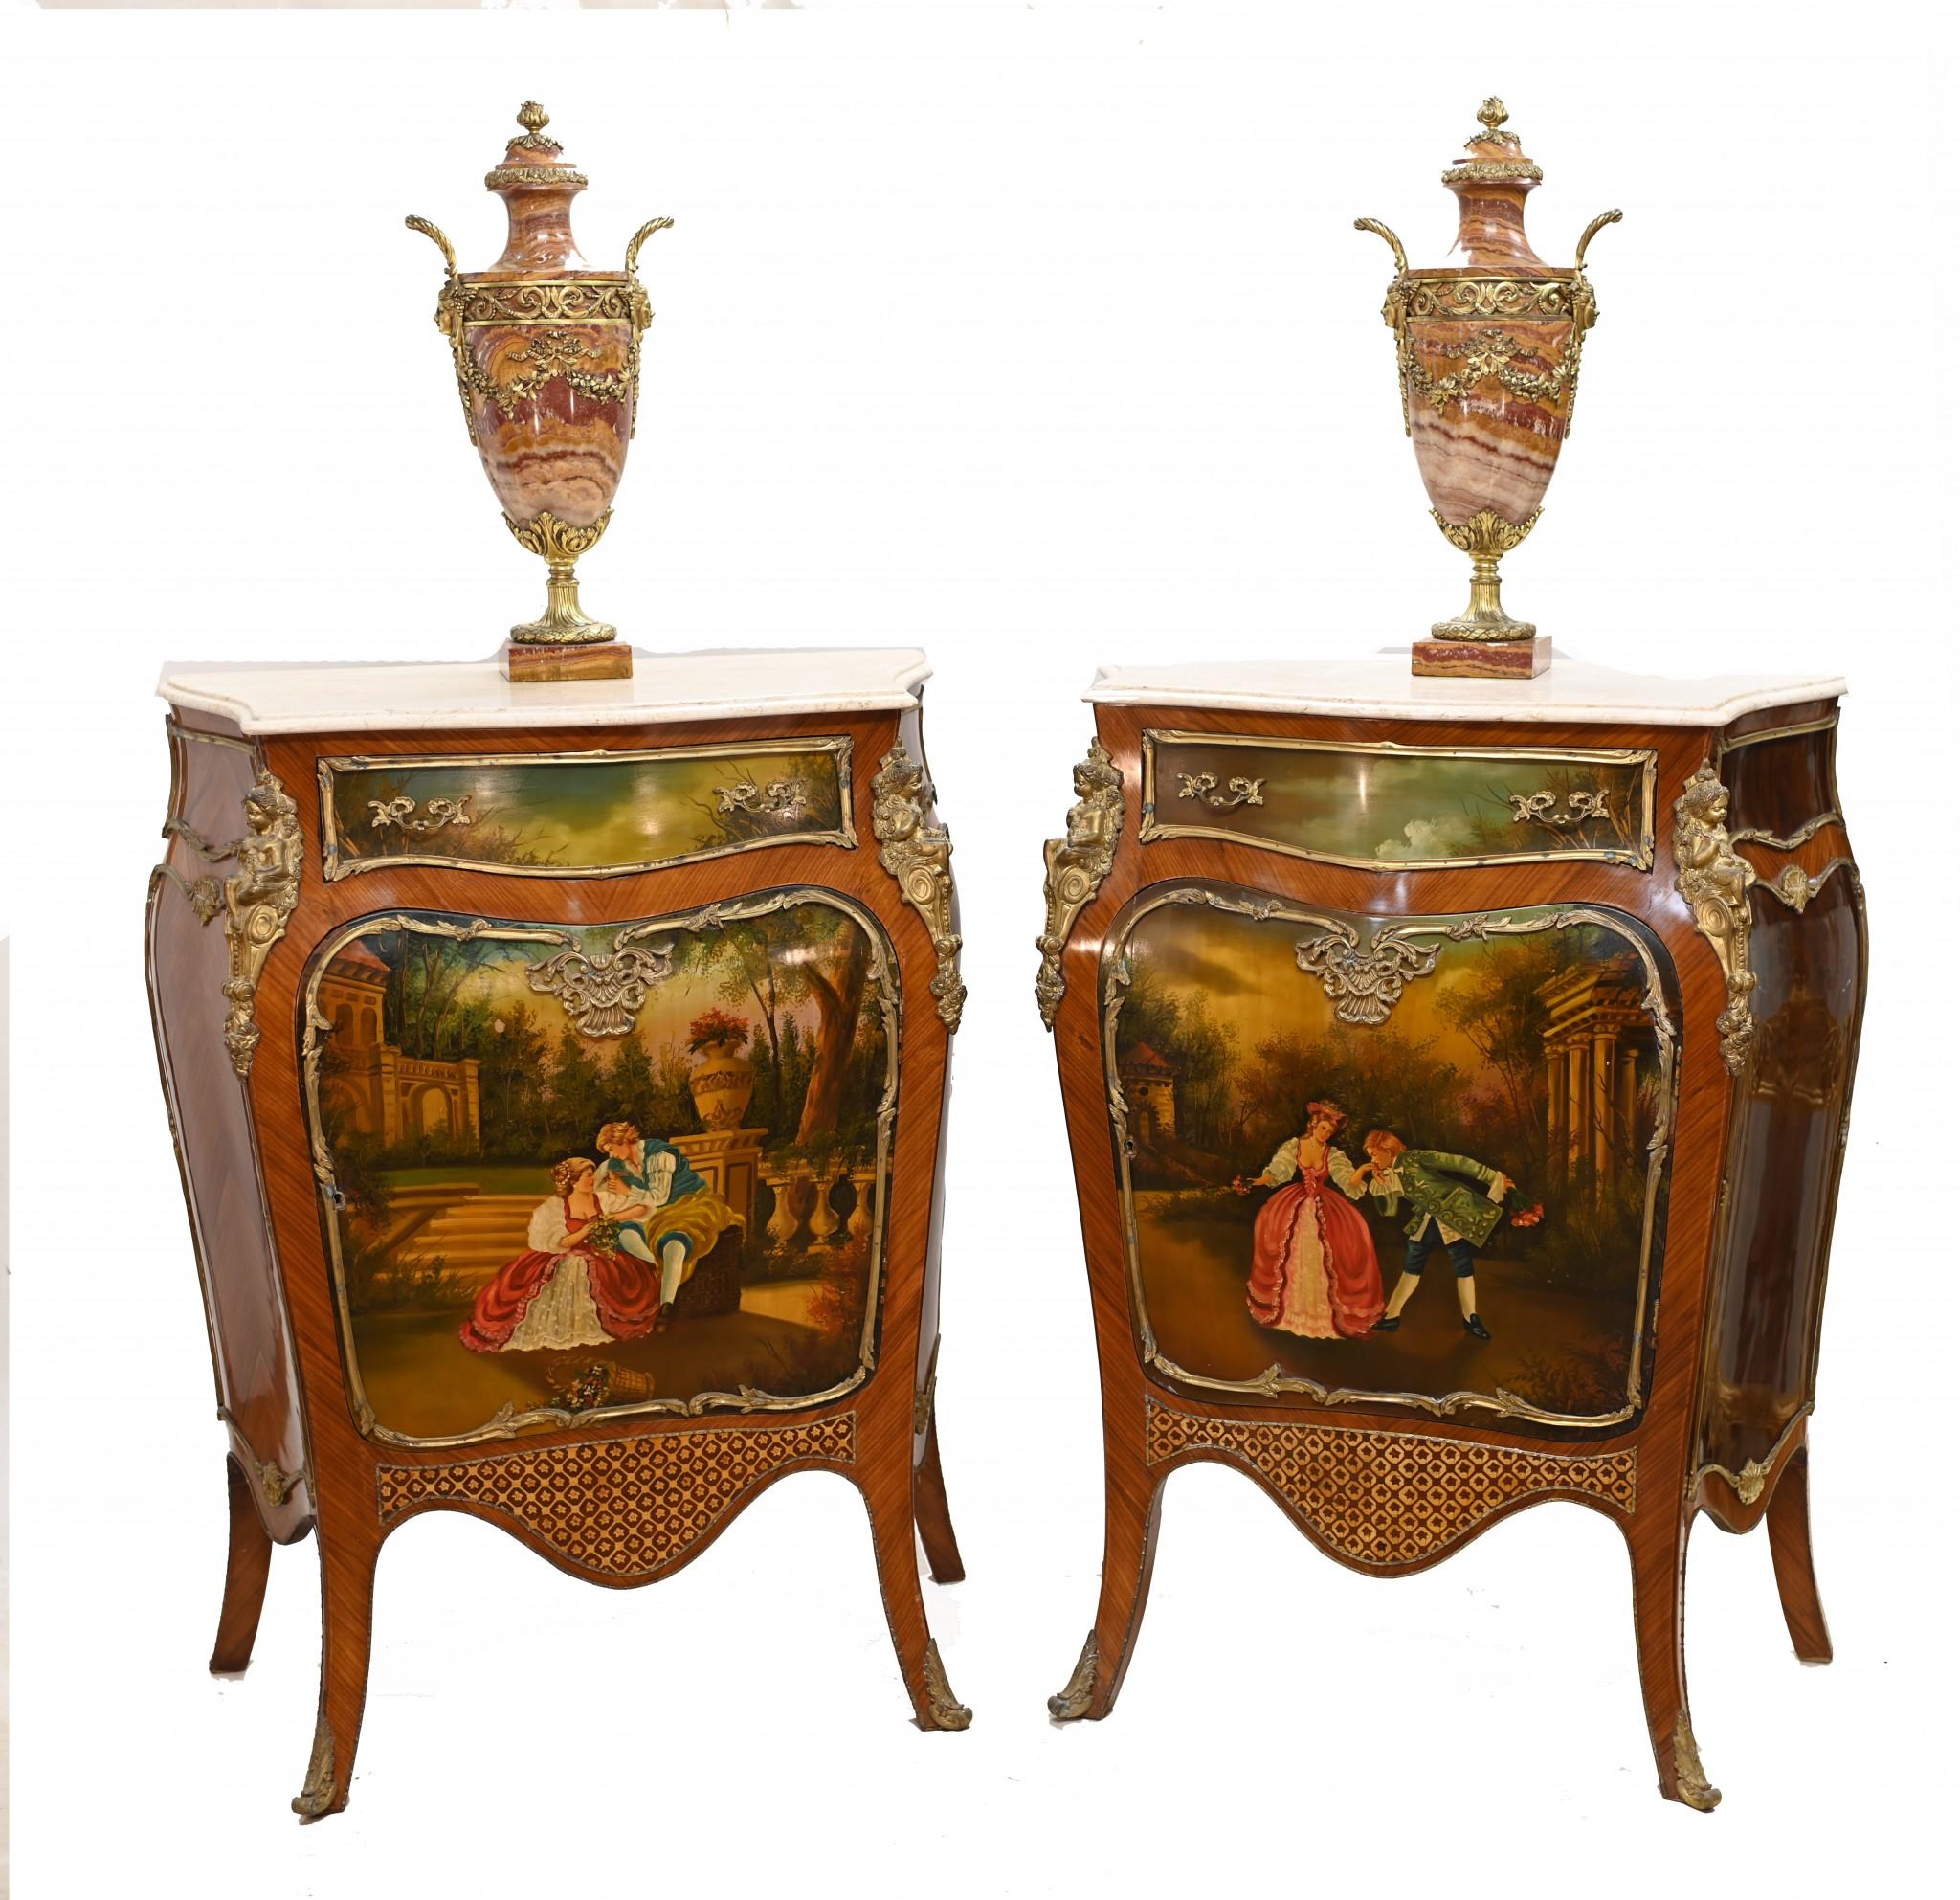 Gorgeous pair of French painted cabinets in the Vernis Martin style
Elegant pair with original ormolu fixtures
Painted sections are in the lacquered Vernis Martin style
White marble tops are smooth and chip free
Purchased from a dealer on Marche